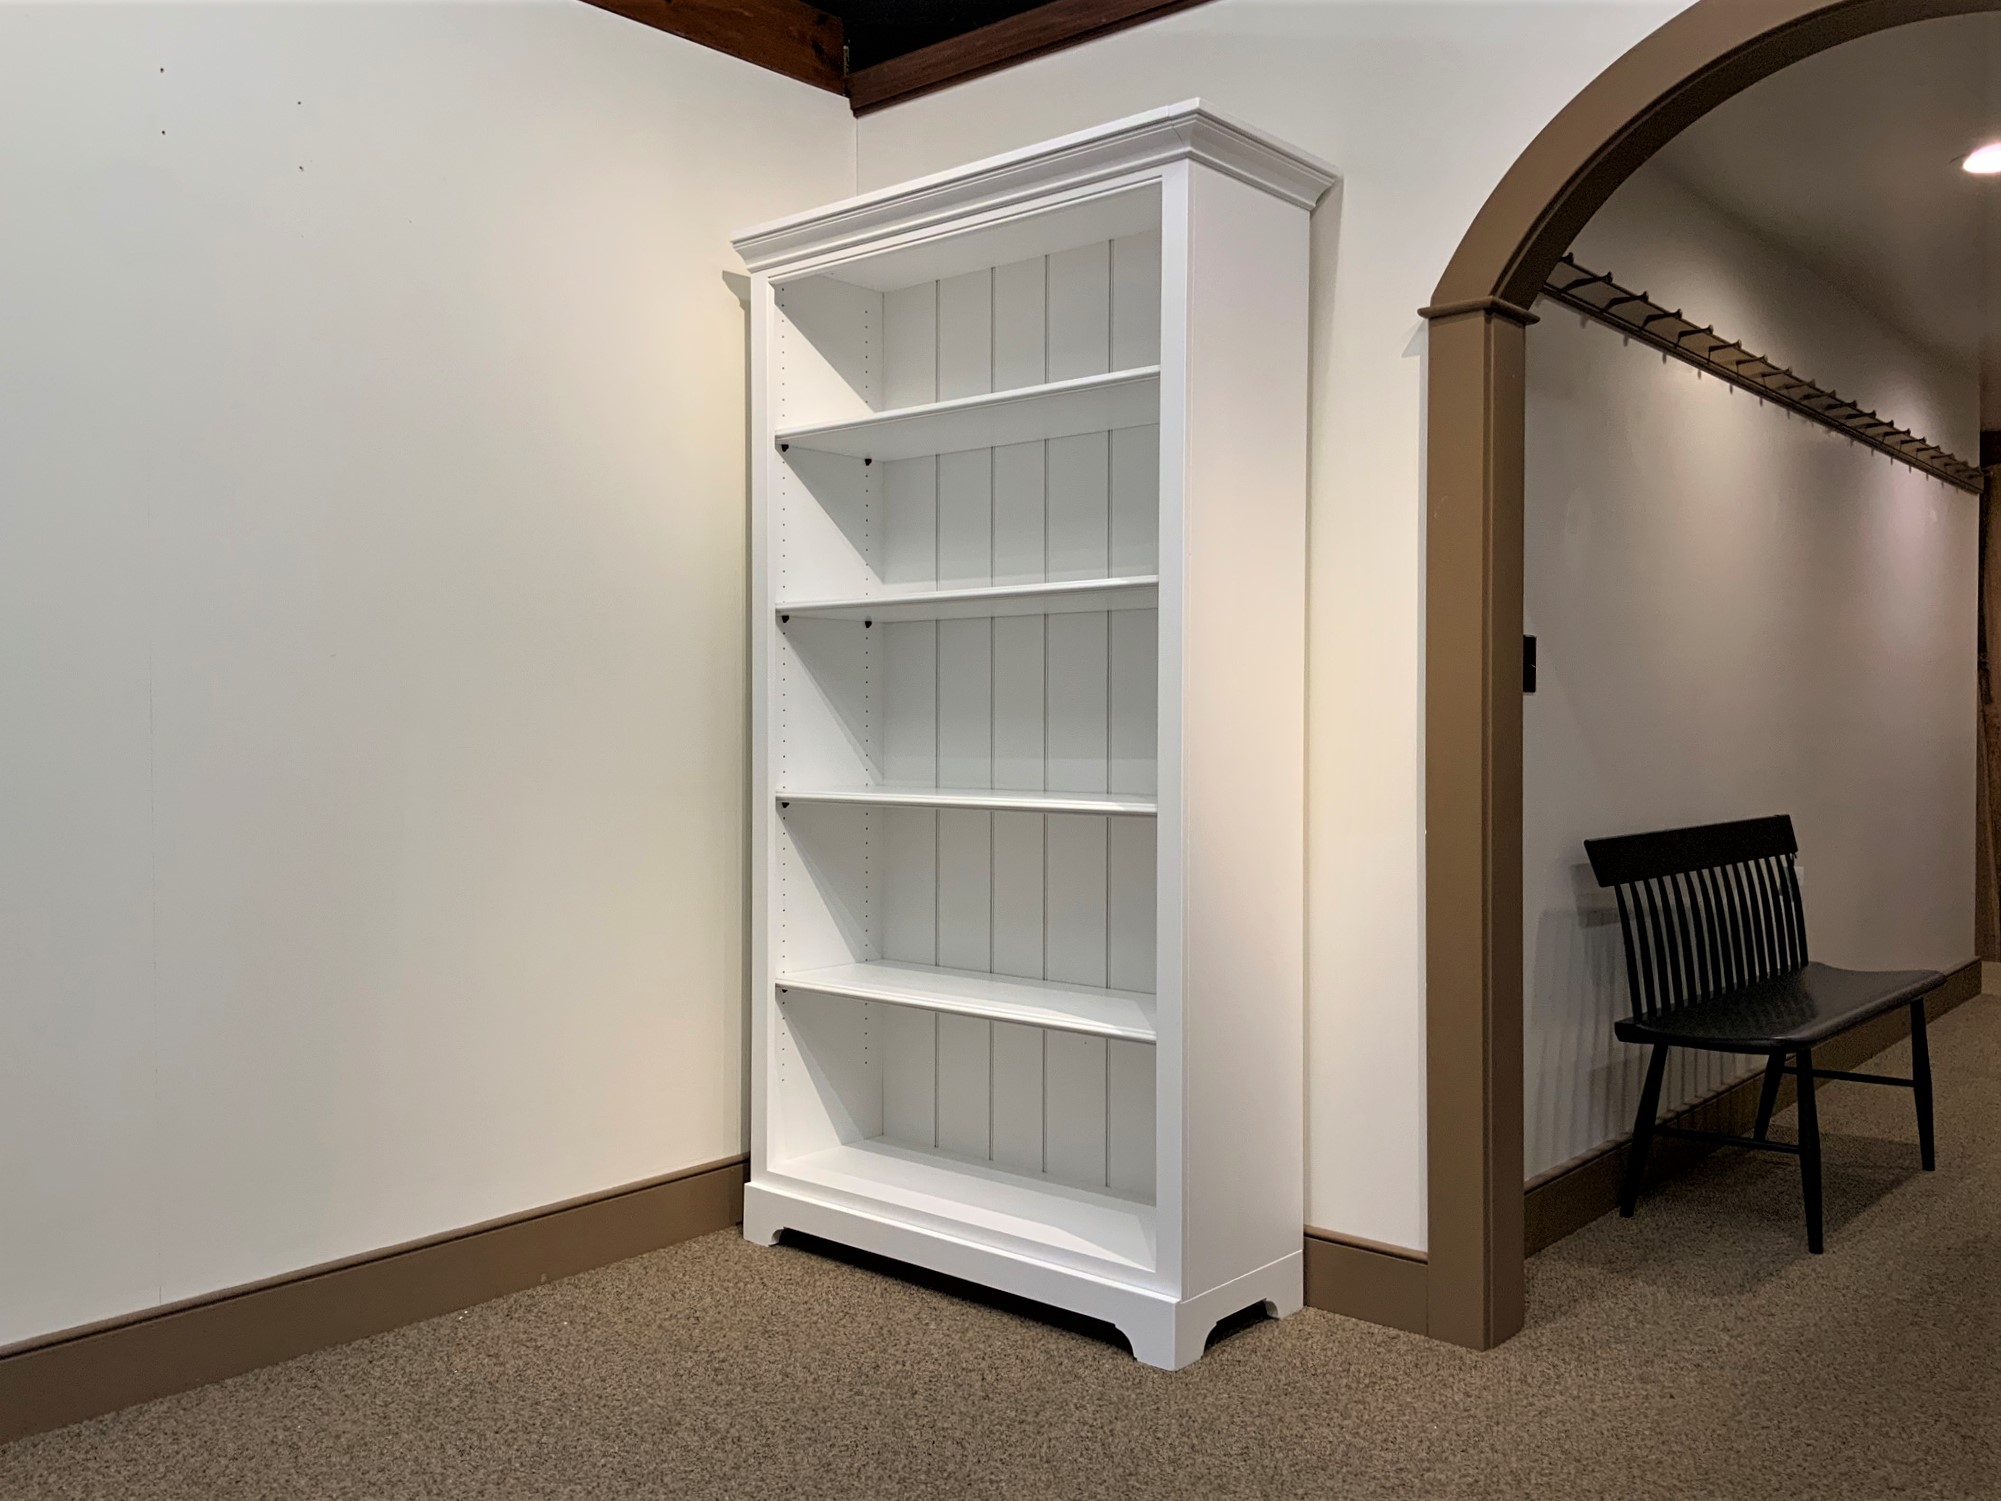 Shaker Bookcases Home Library, Deep Shelf Bookcase